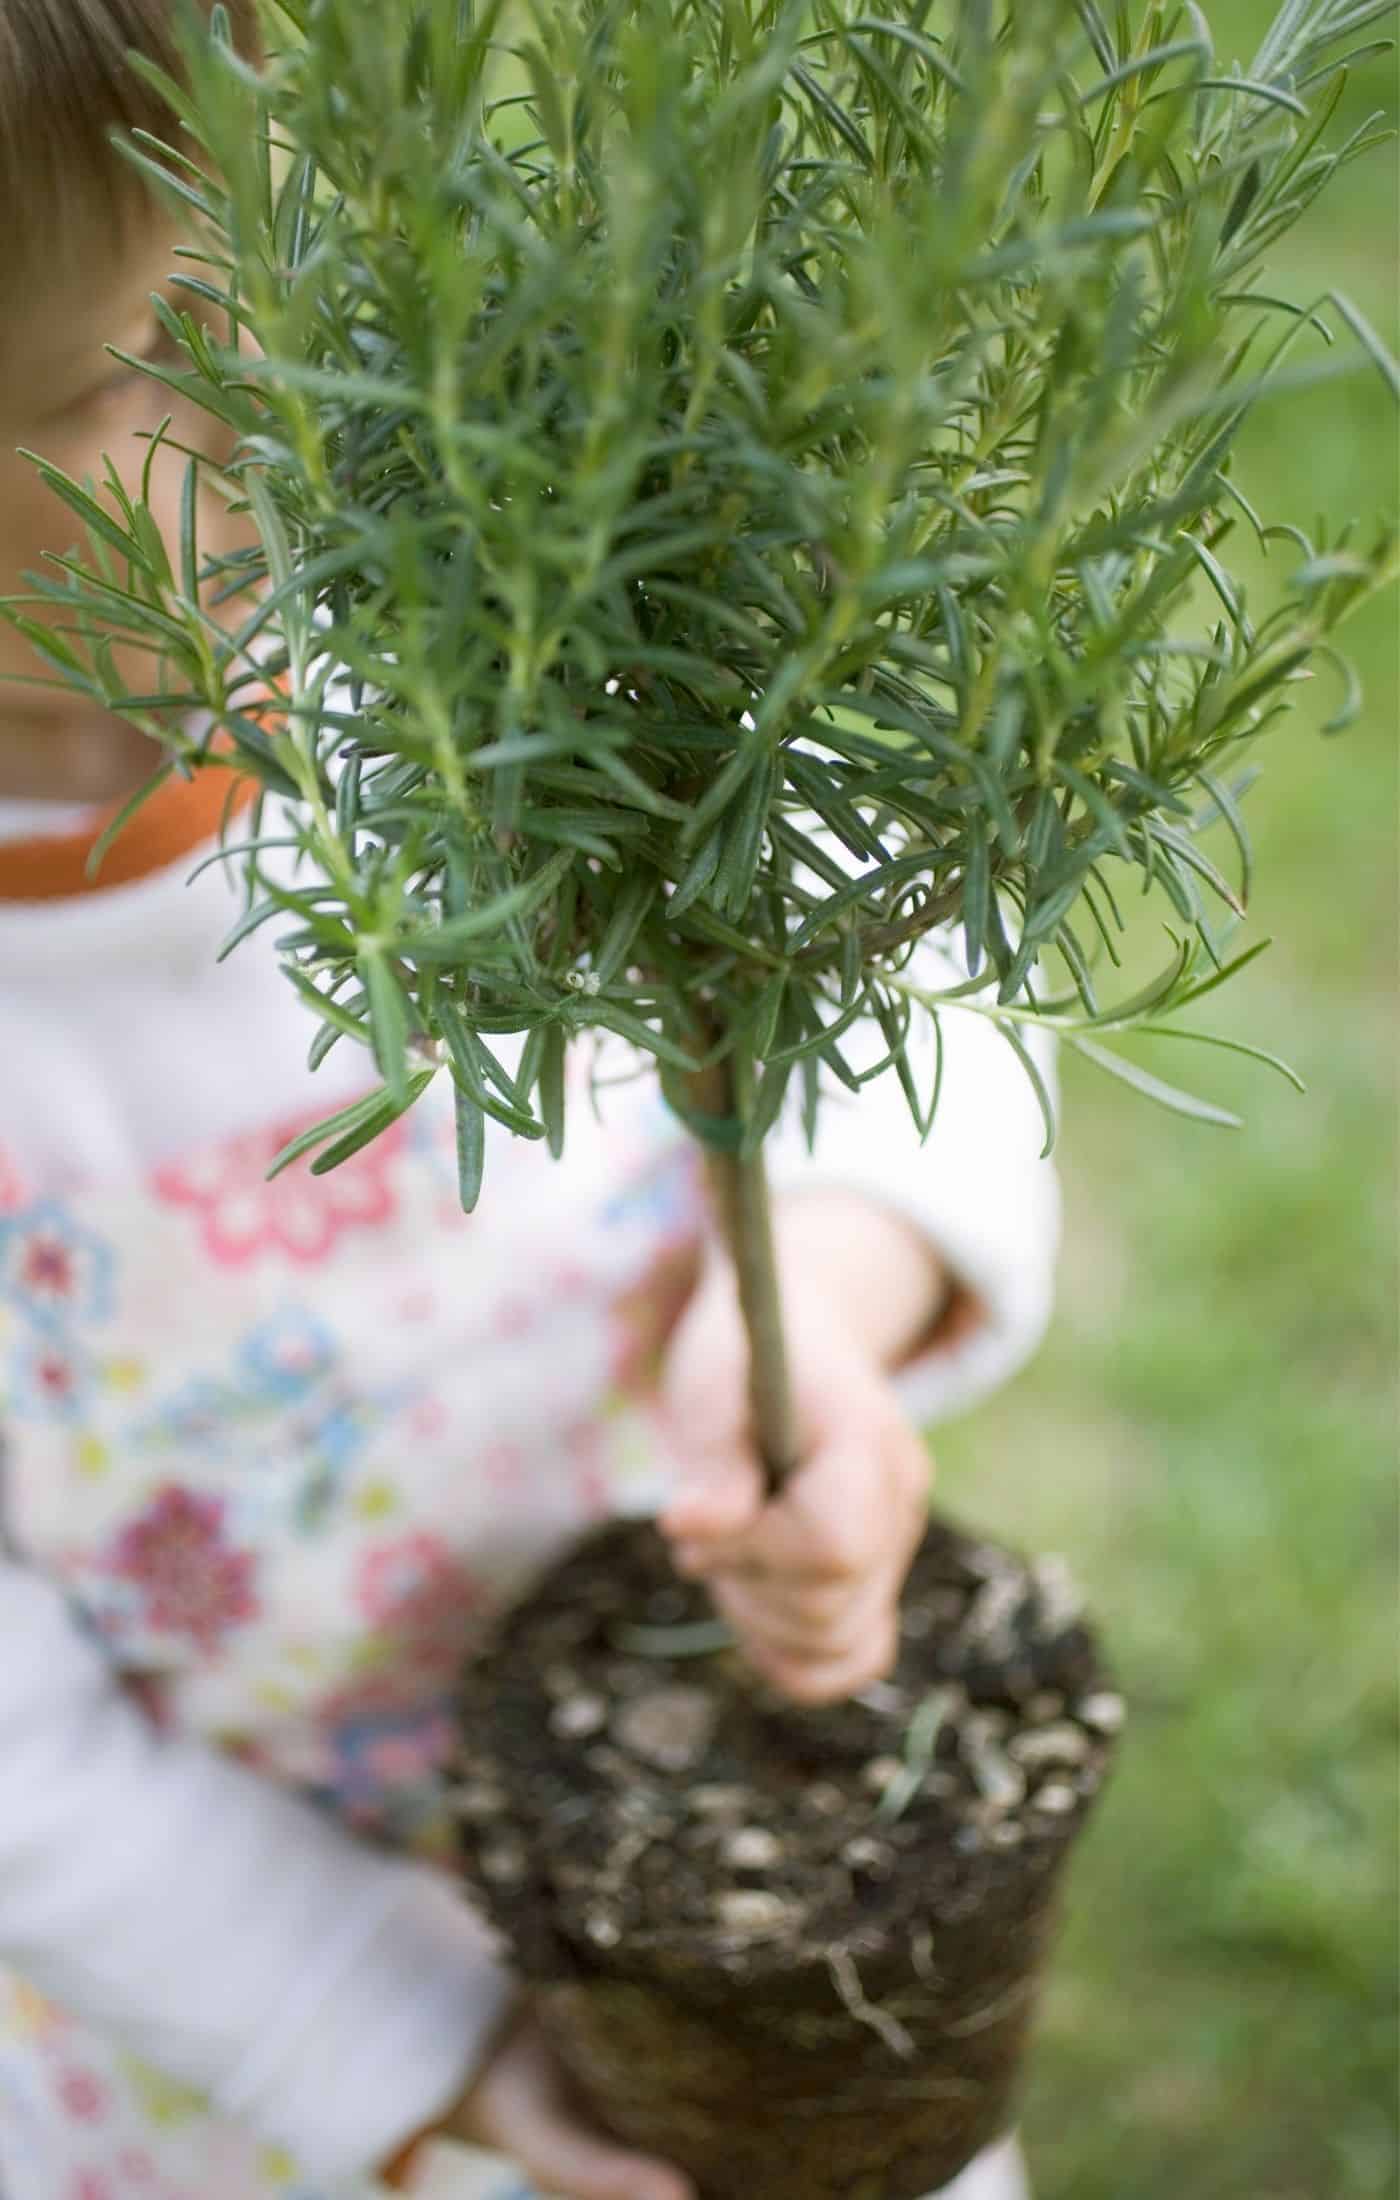 Rosemary tree showing roots carried by kid